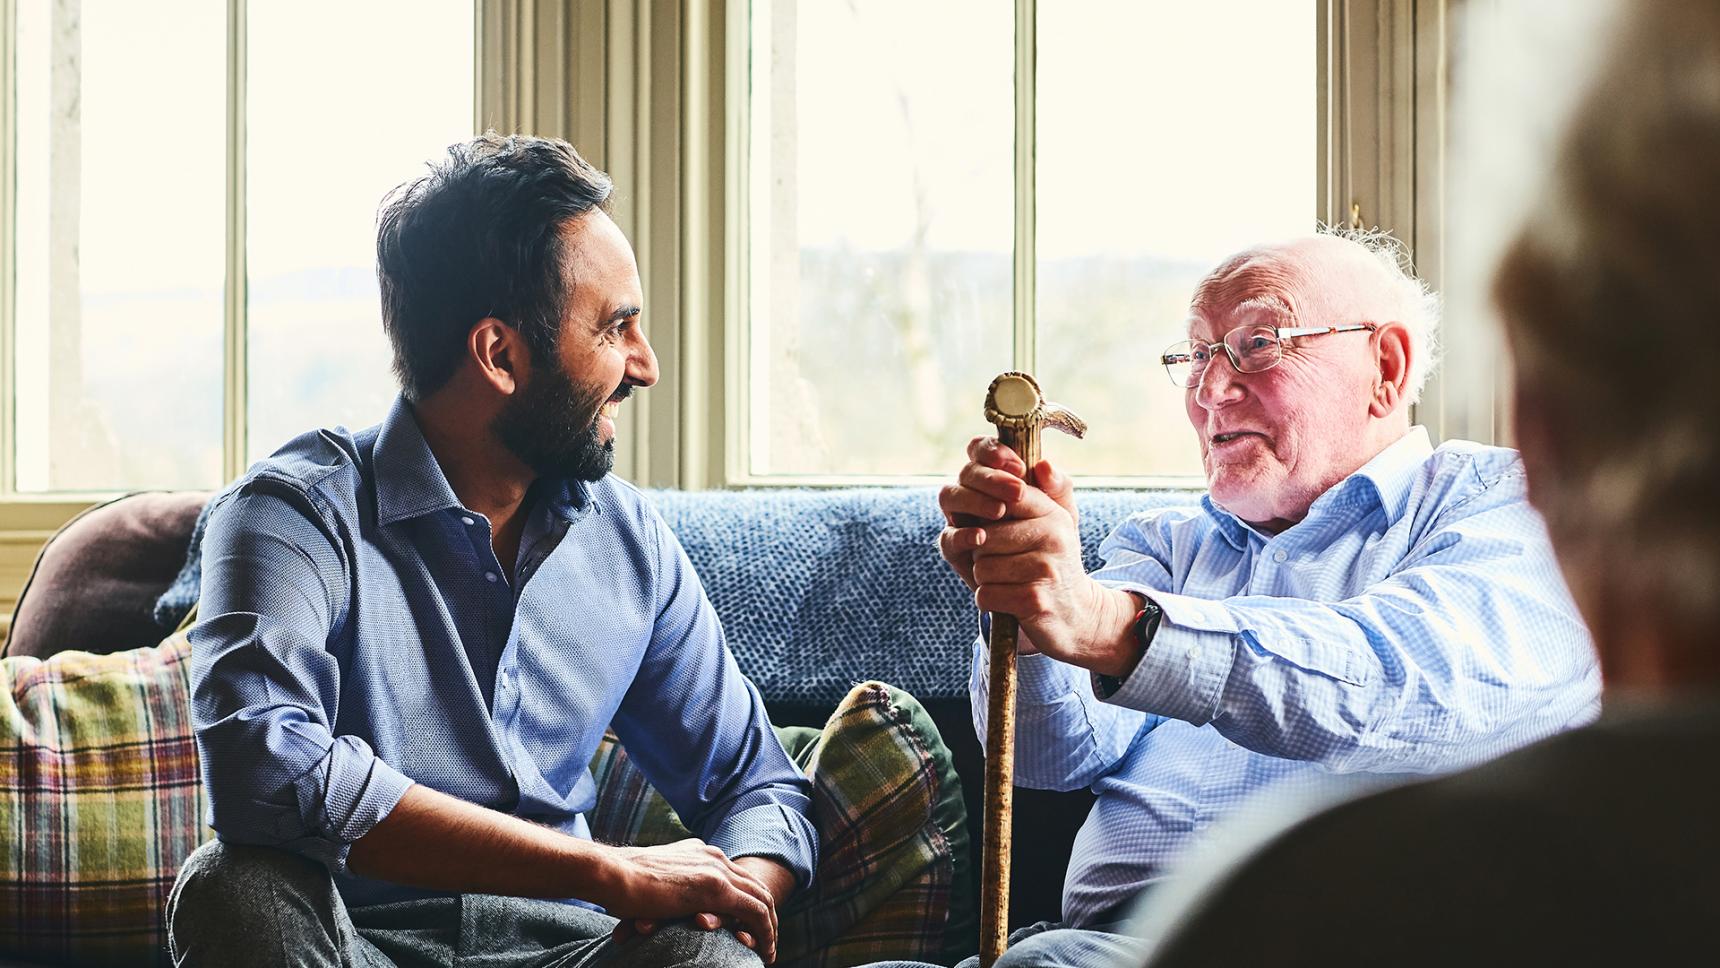 Carer supports elderly man with dementia